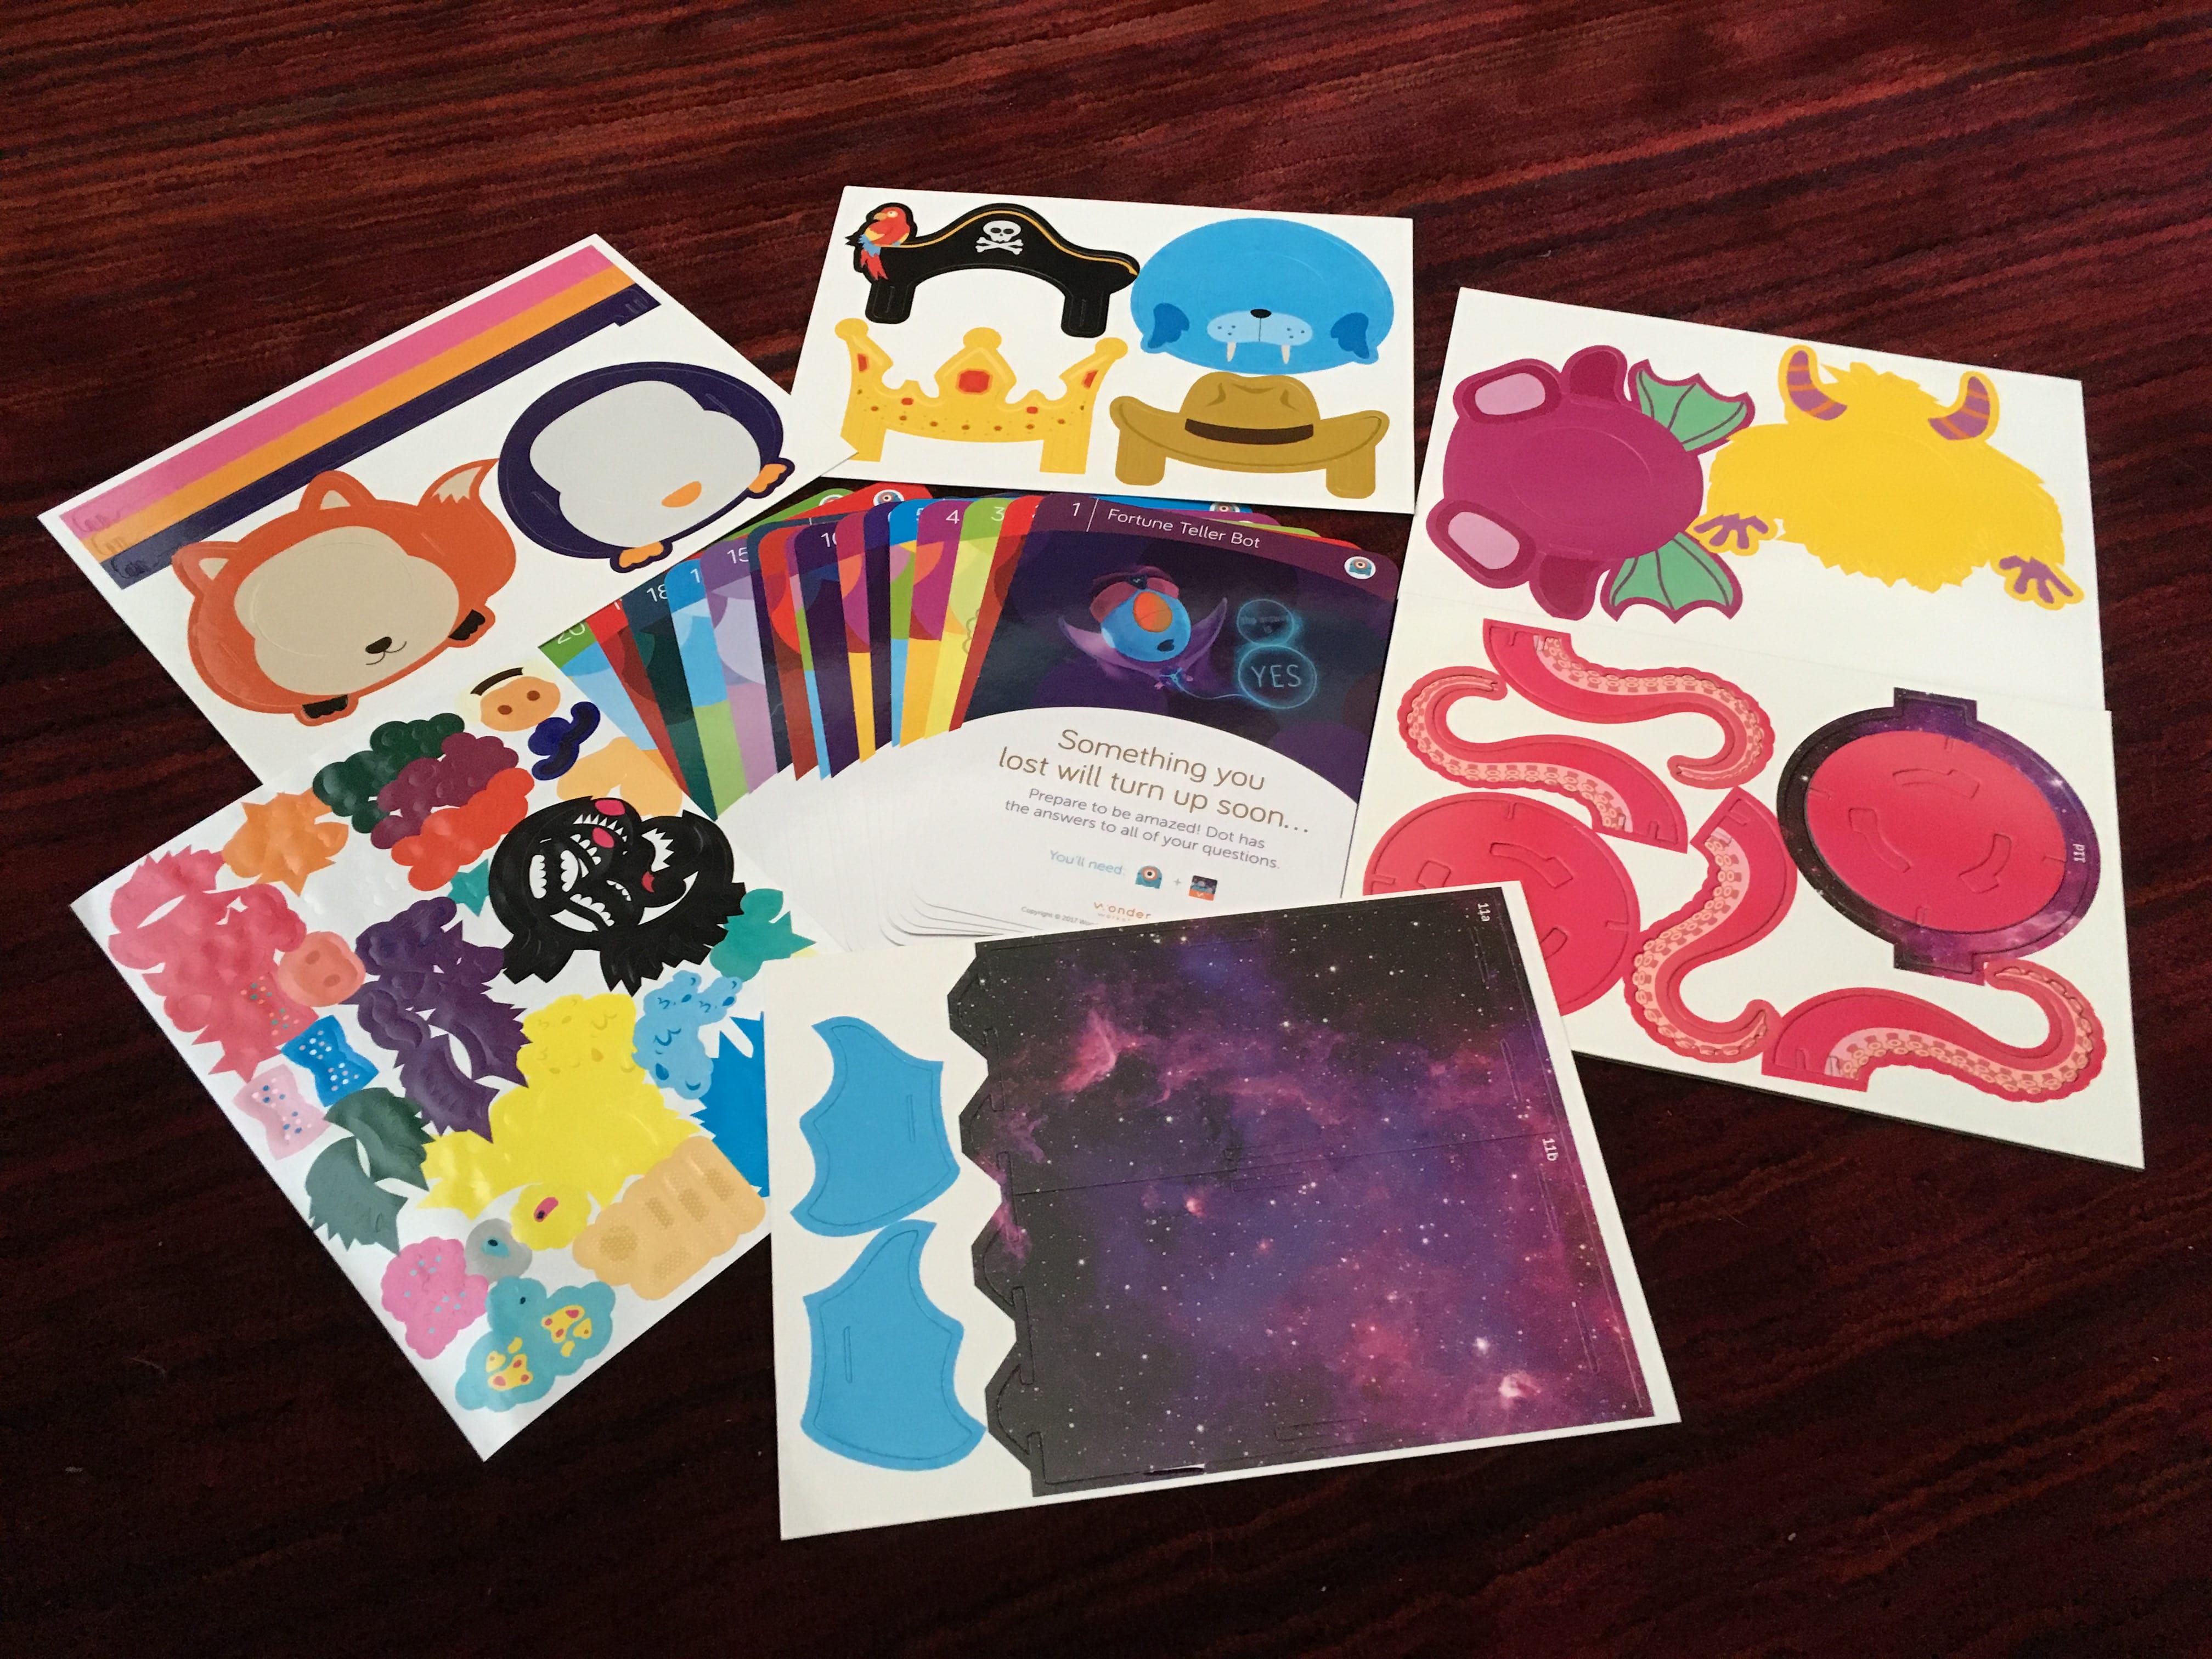 Dot Creativity Kit Brings Together Coding and Craft - Hands-on Review, Tech Age Kids